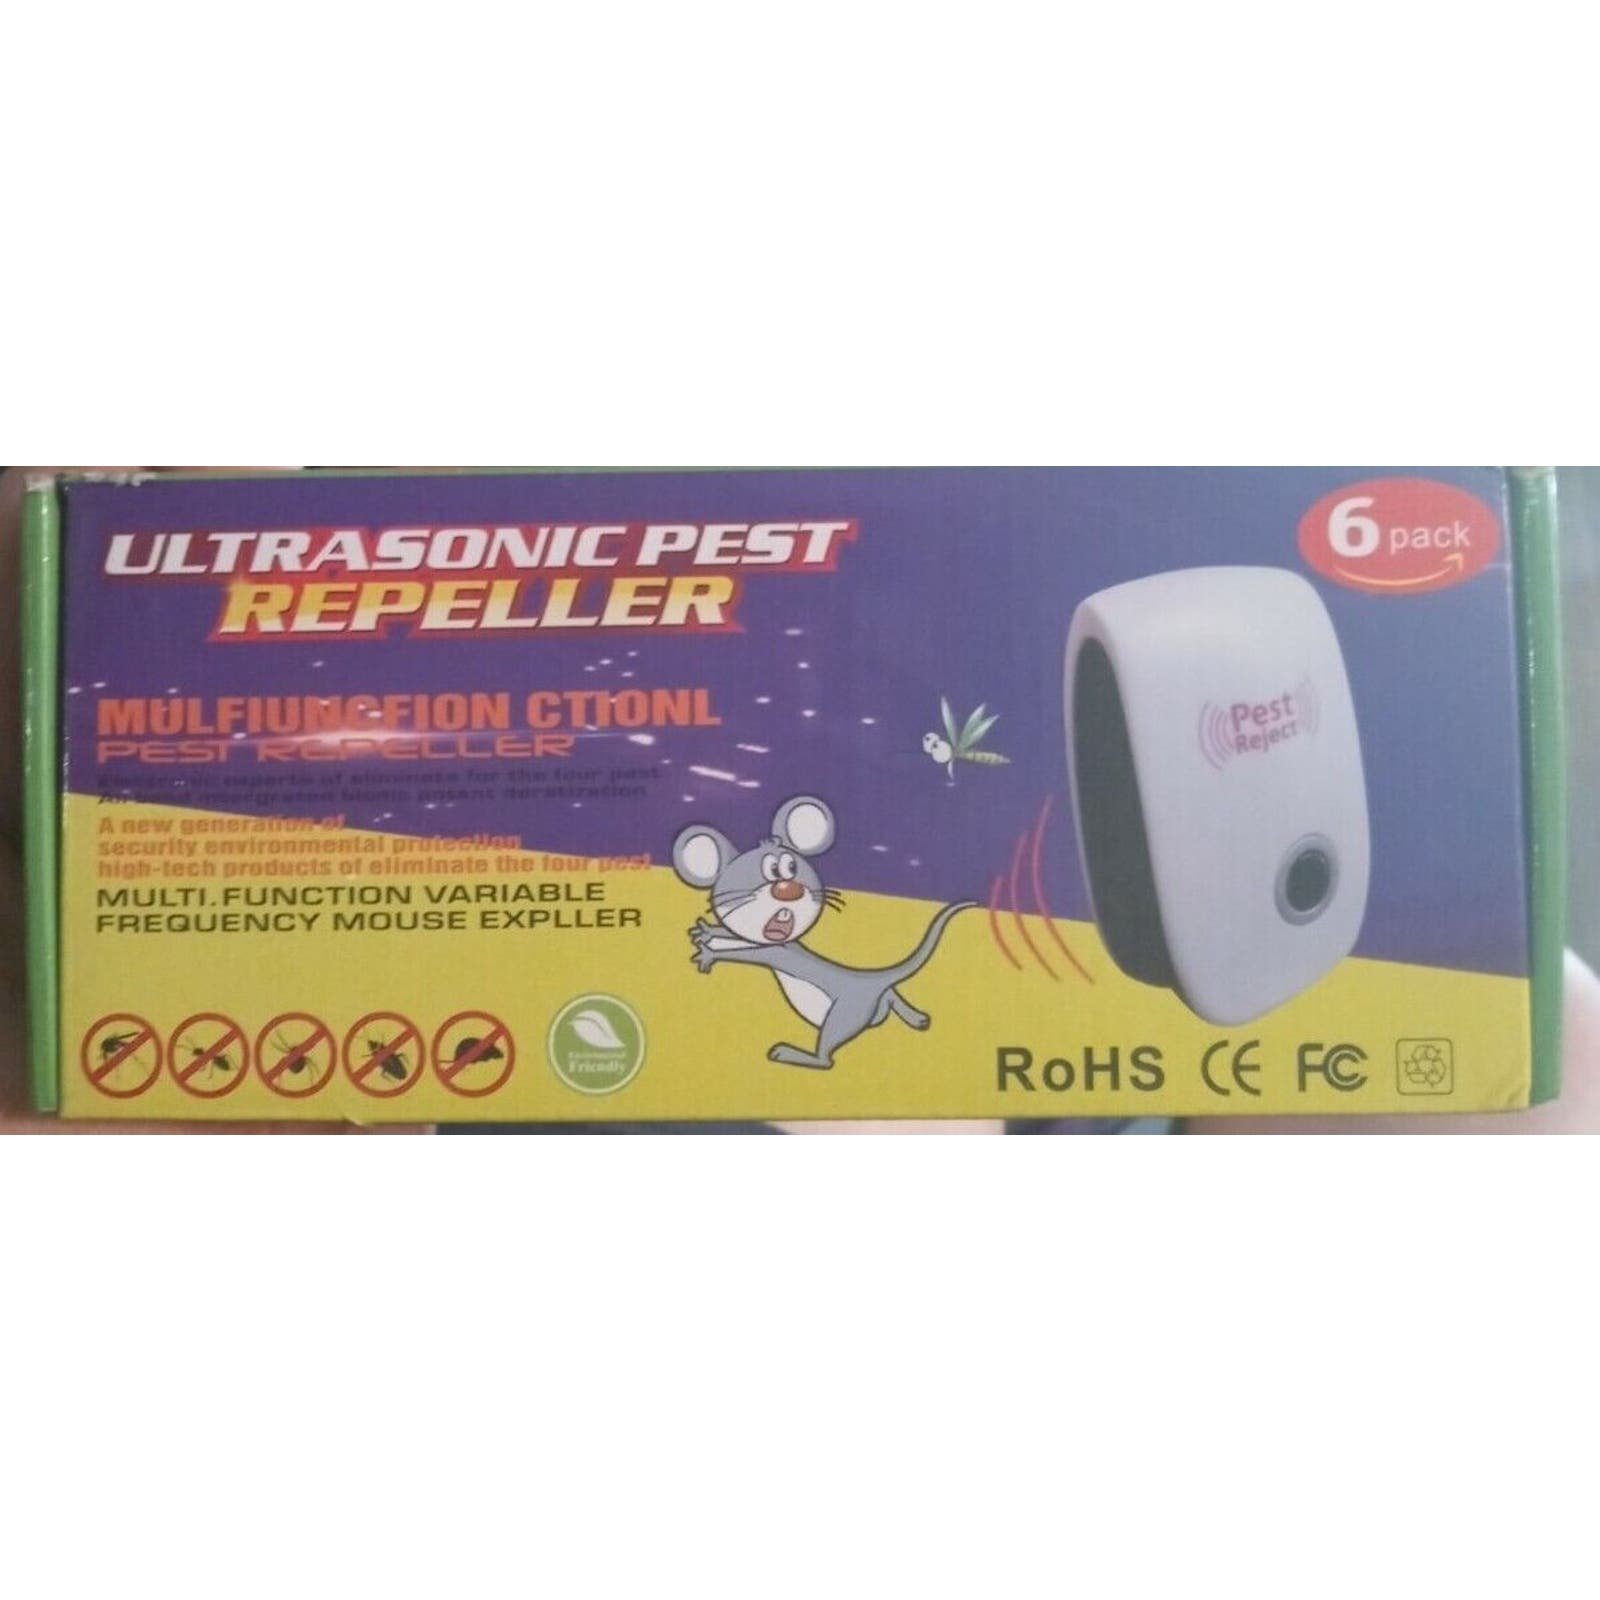 Electronic Pest Reject Control Ultrasonic Repeller Home Bug Rat Spider Roaches MvIyW0uKH